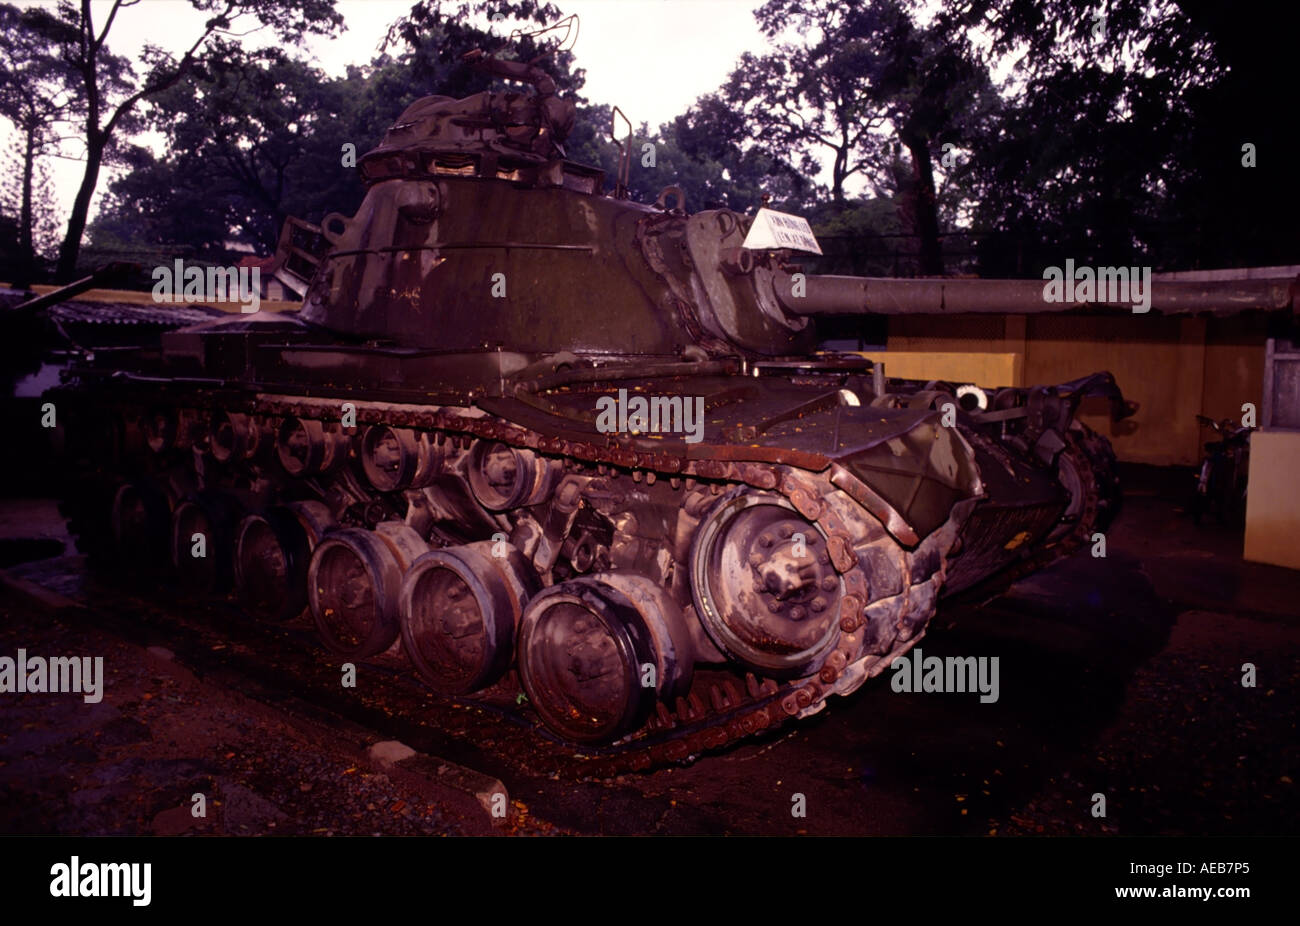 M48 tank "The Patton," Museum of War Remnants, formerly The American War Crimes Museum, Ho Chi Minh, formerly Saigon, Vietnam. Stock Photo